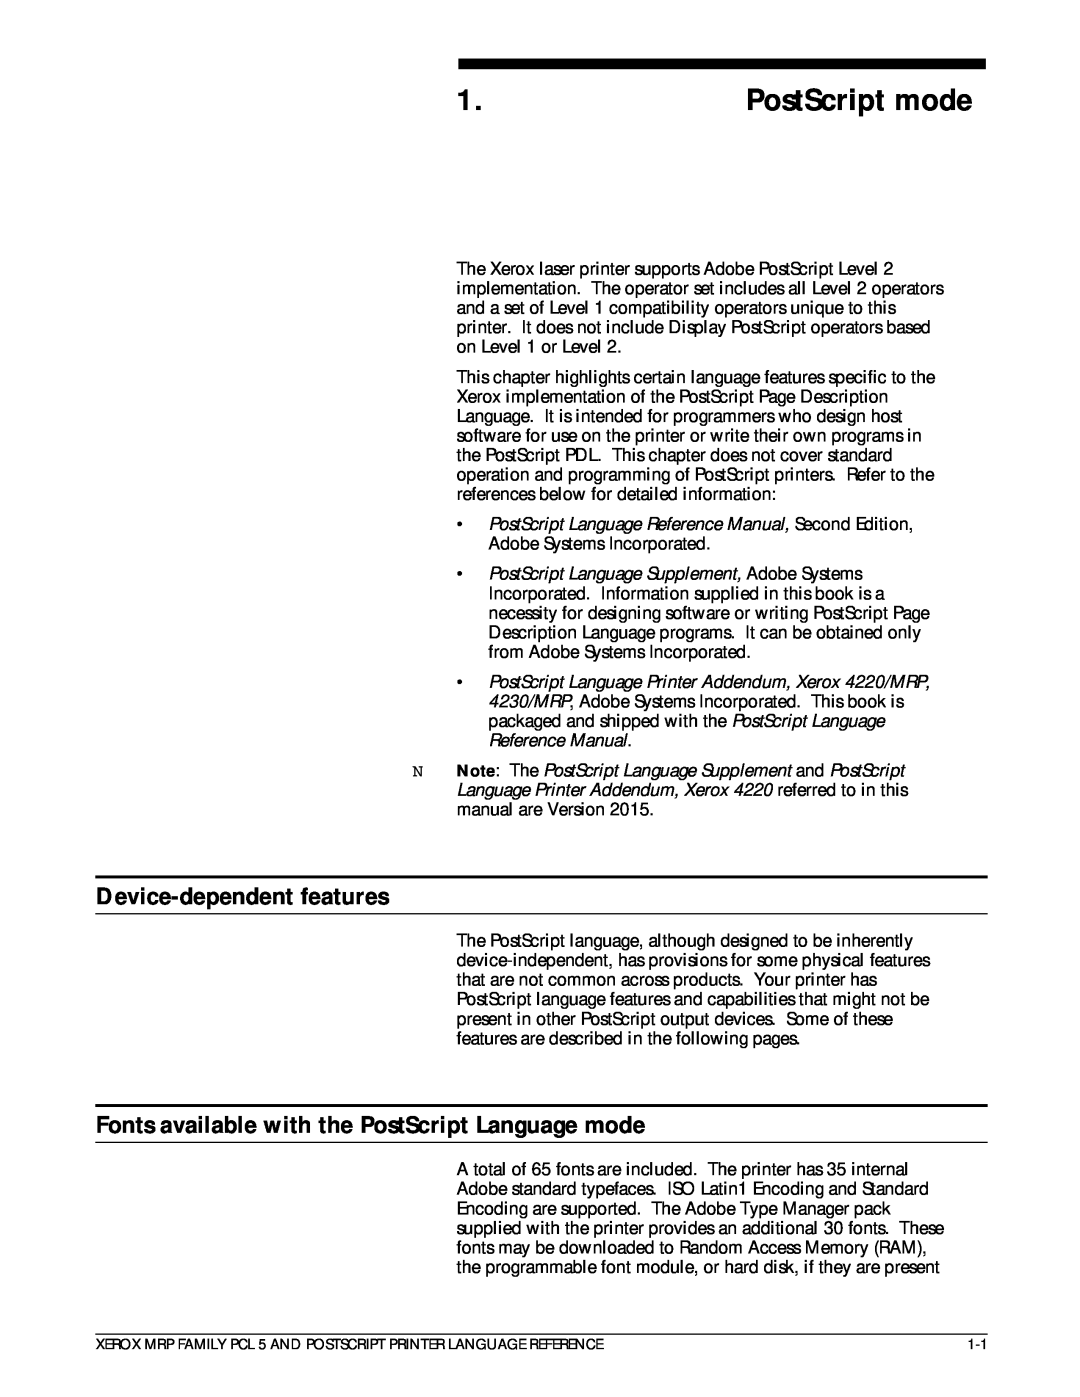 Xerox 4215/MRP manual PostScript mode, Device-dependent features, Fonts available with the PostScript Language mode 